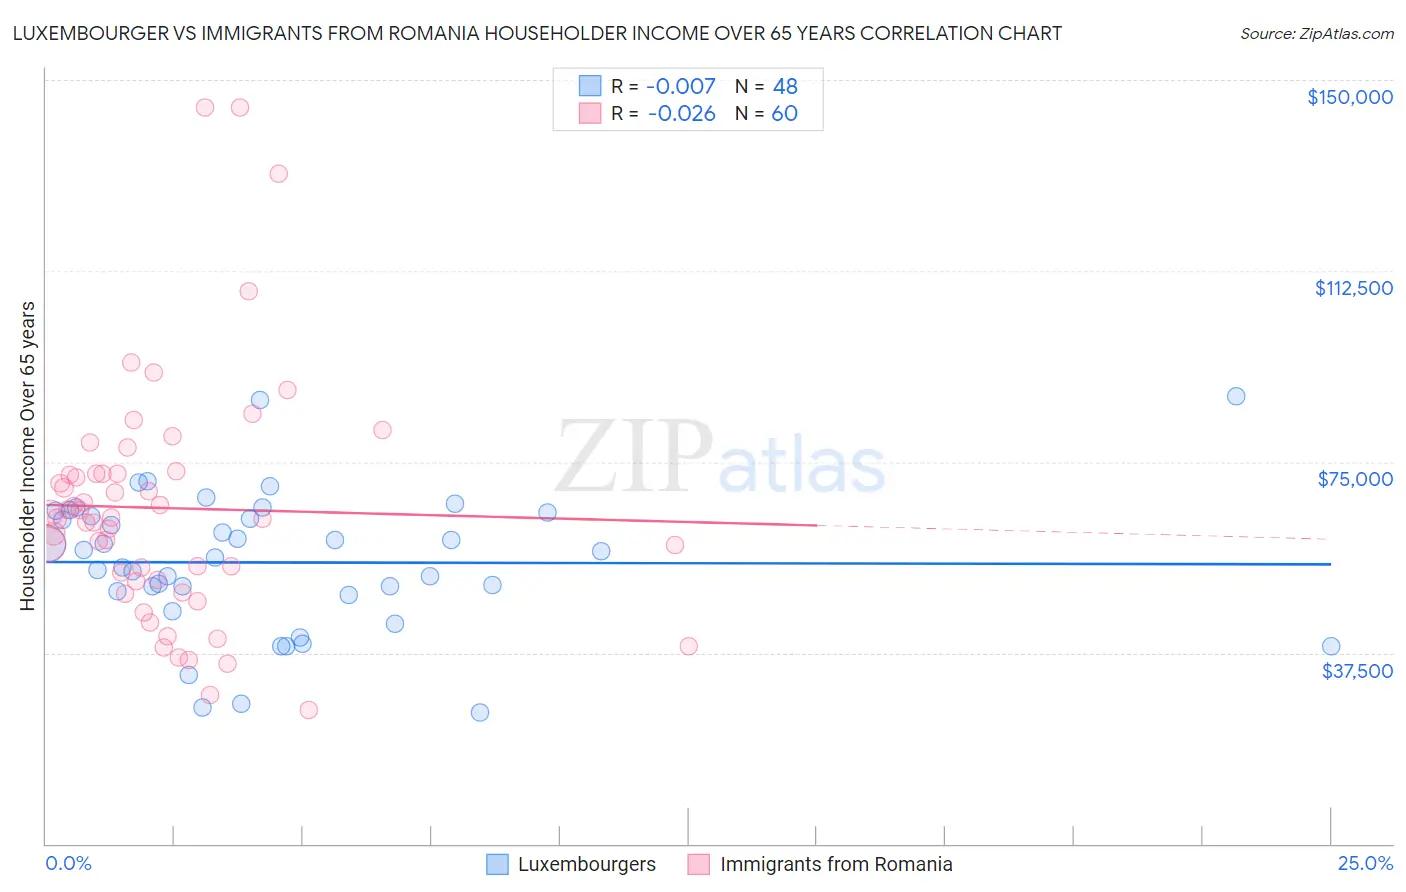 Luxembourger vs Immigrants from Romania Householder Income Over 65 years